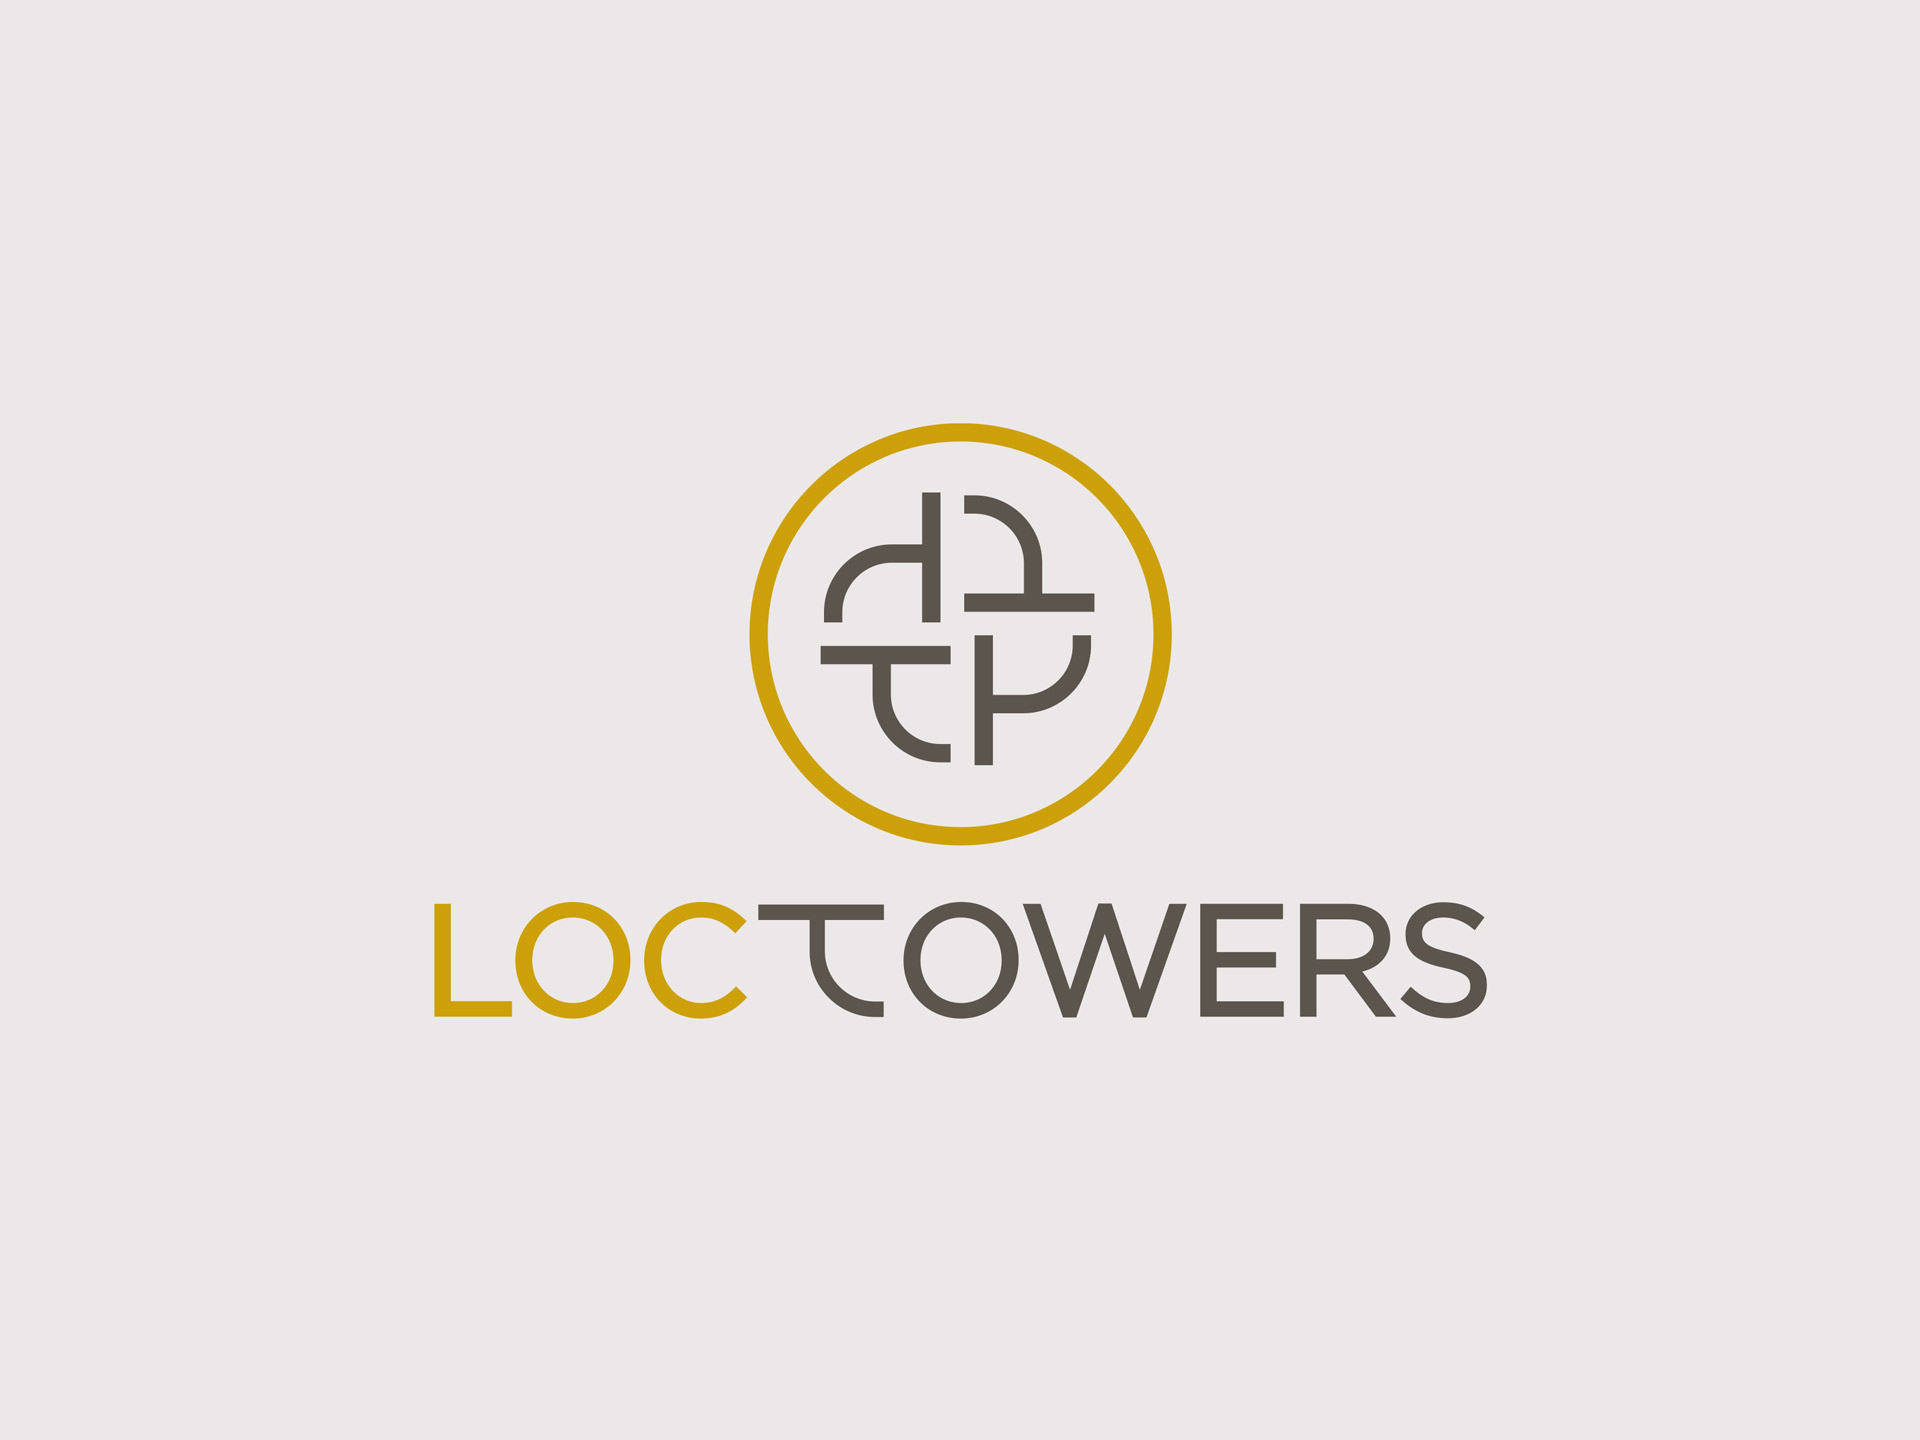 Loctowers